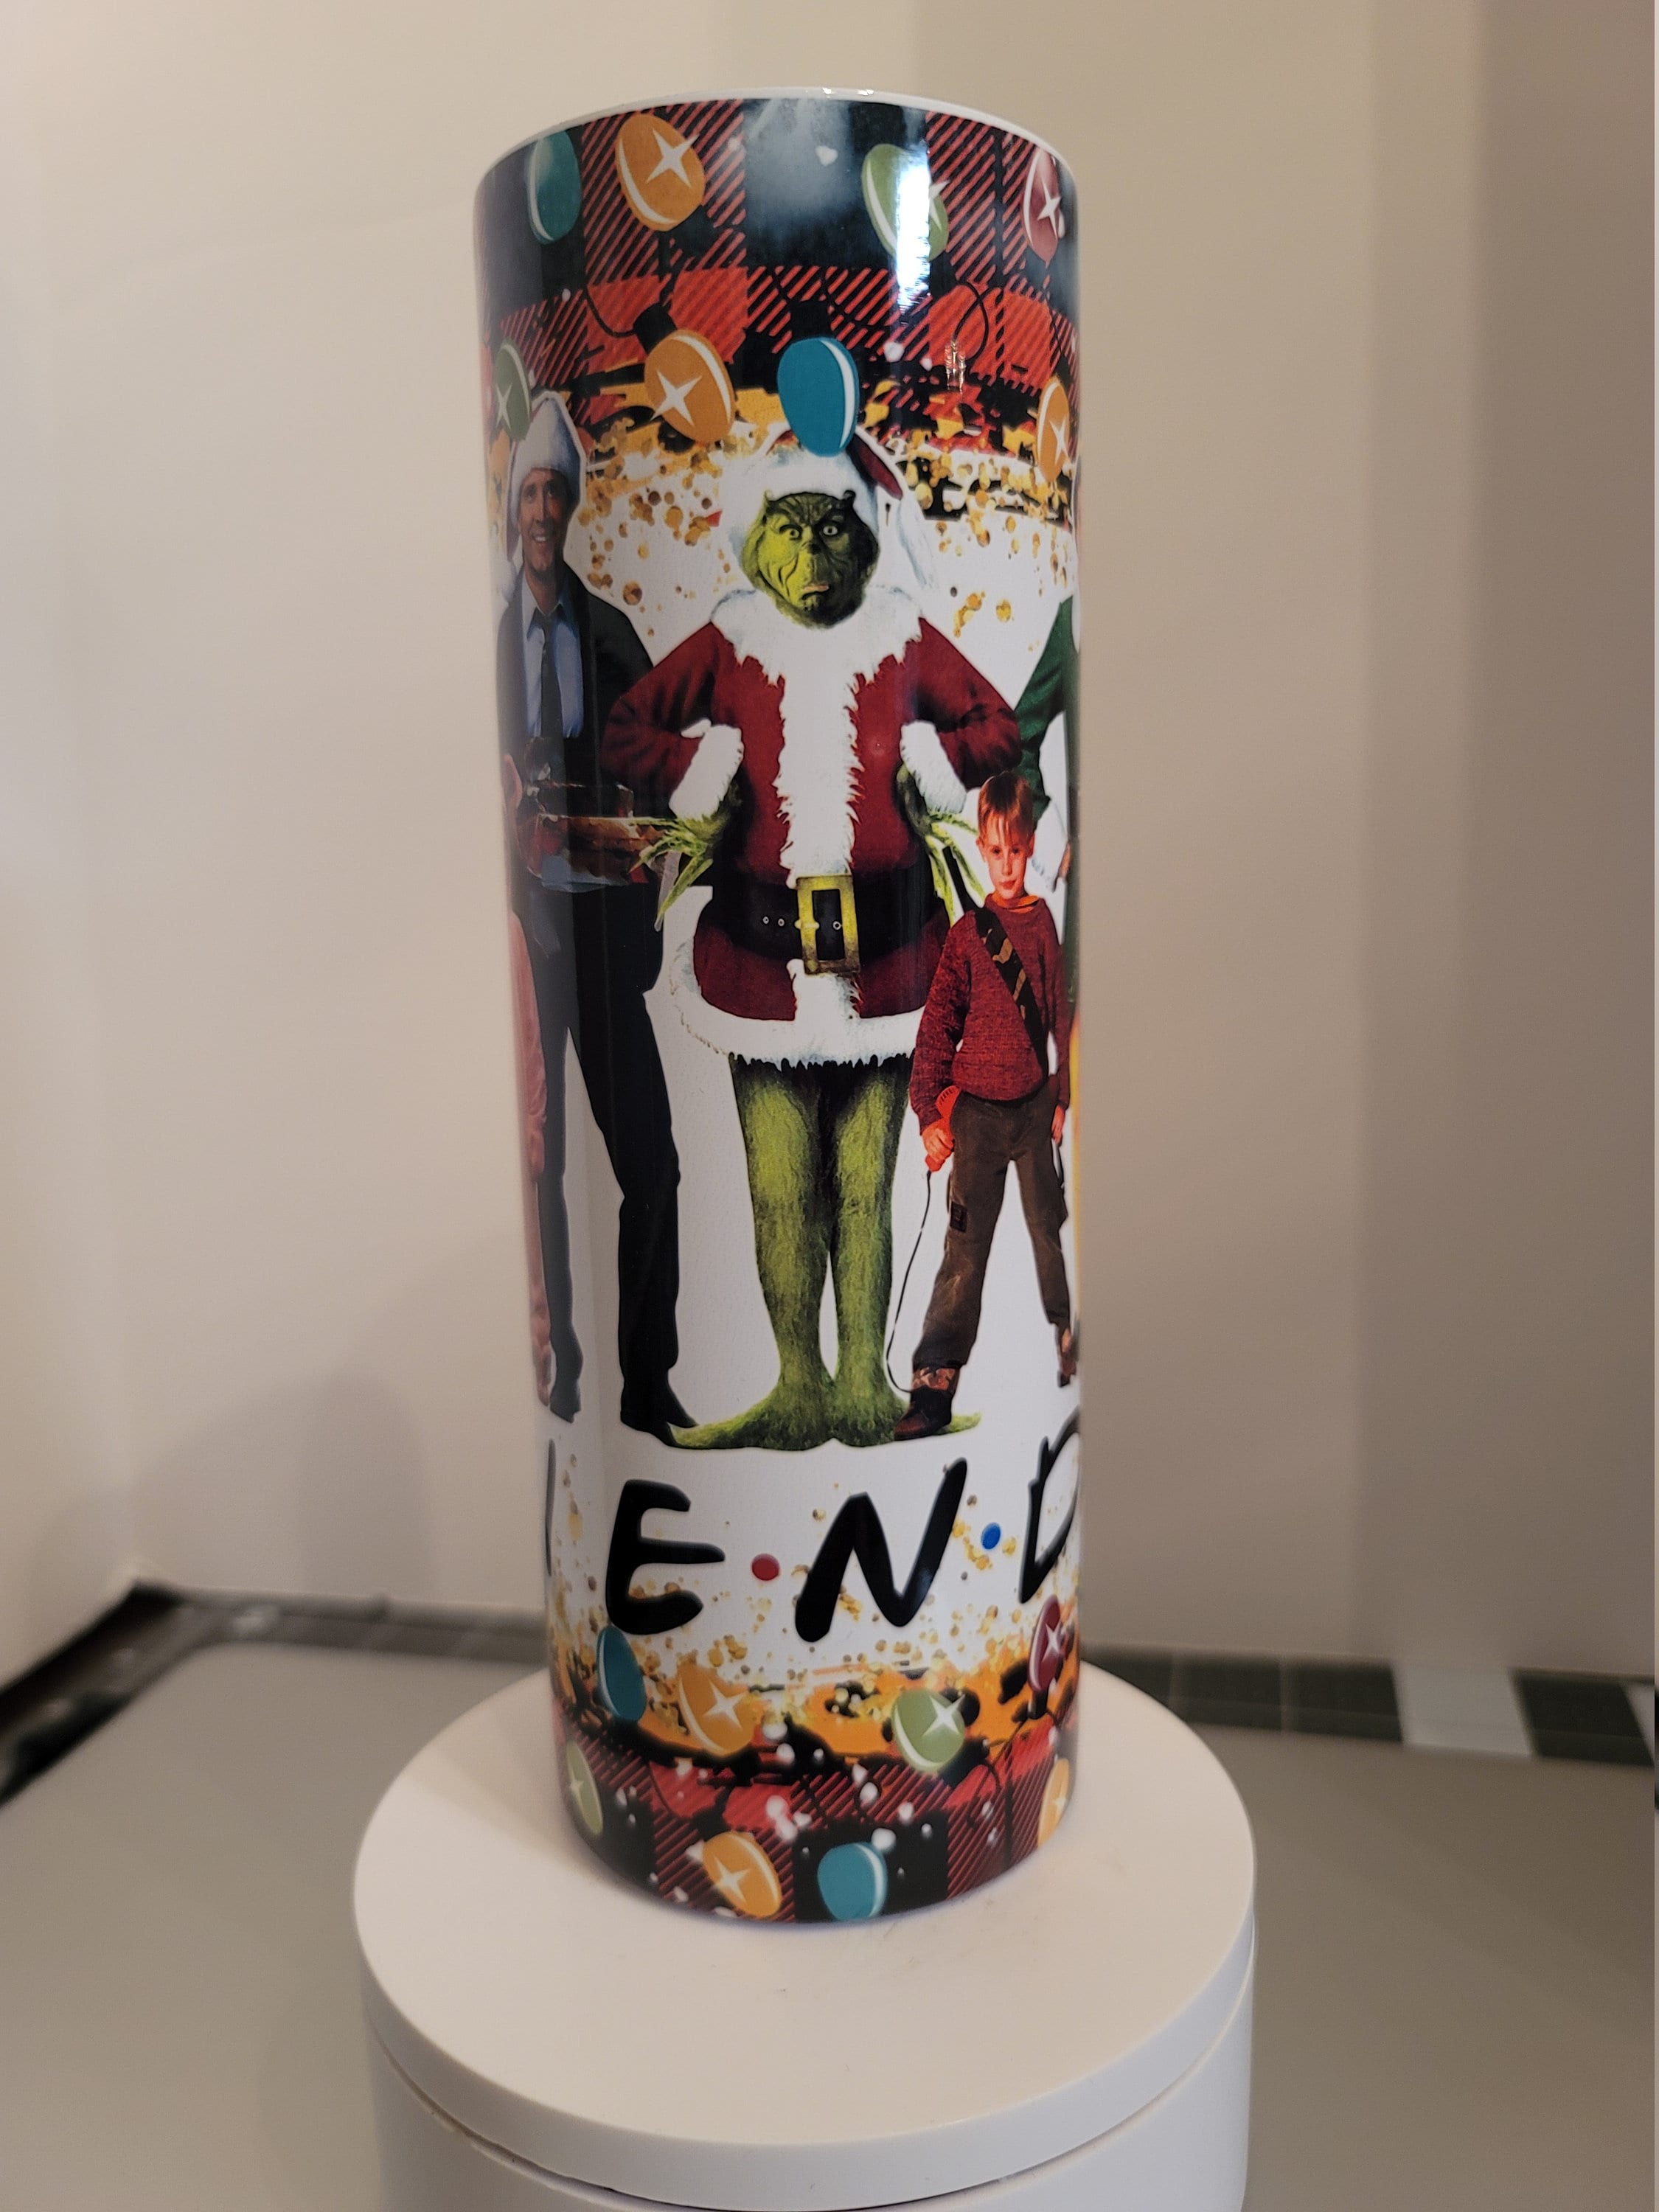 Mast General Store  The Grinch 20 Ounce Stainless Steel Tumbler